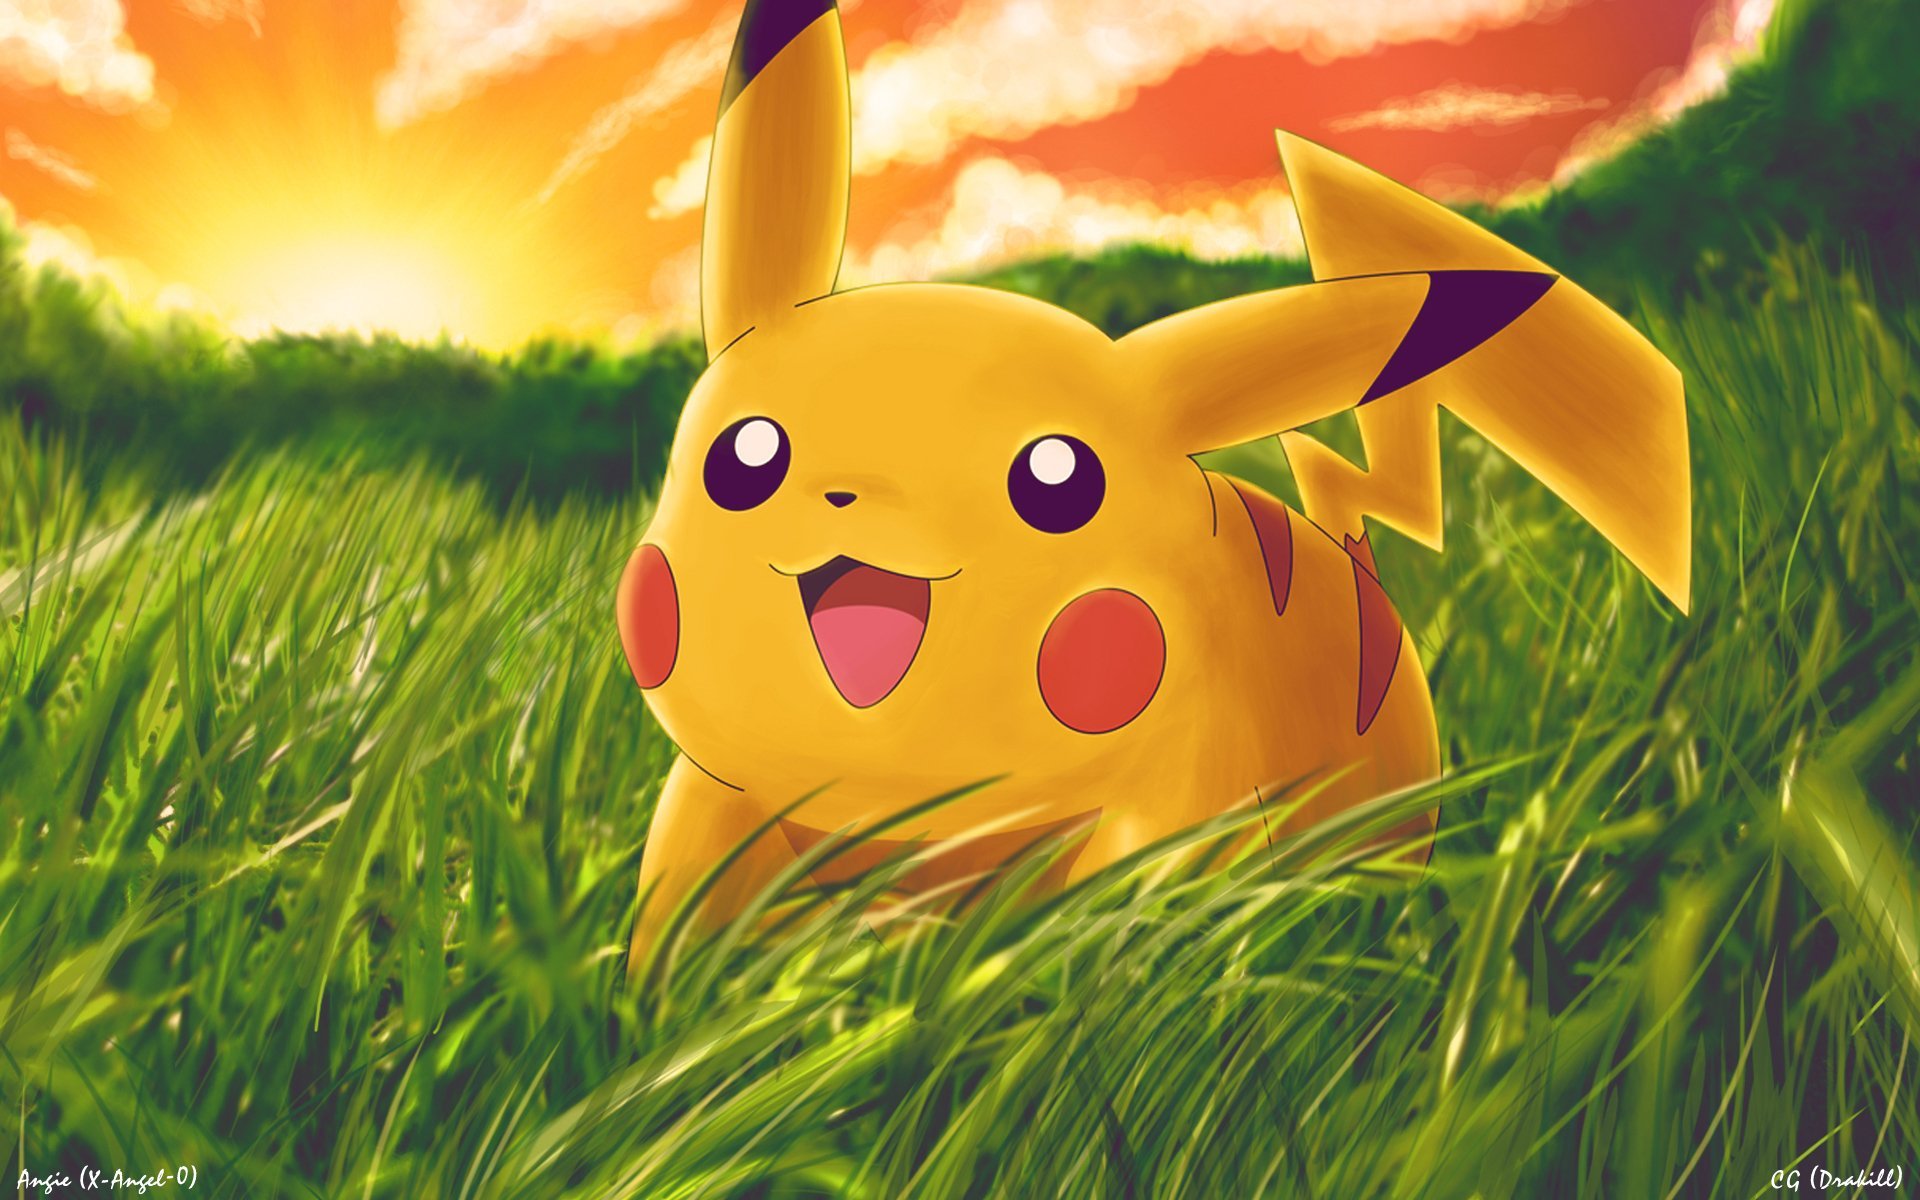 A Pikachu wallpaper with the sun rising in the background - Pikachu